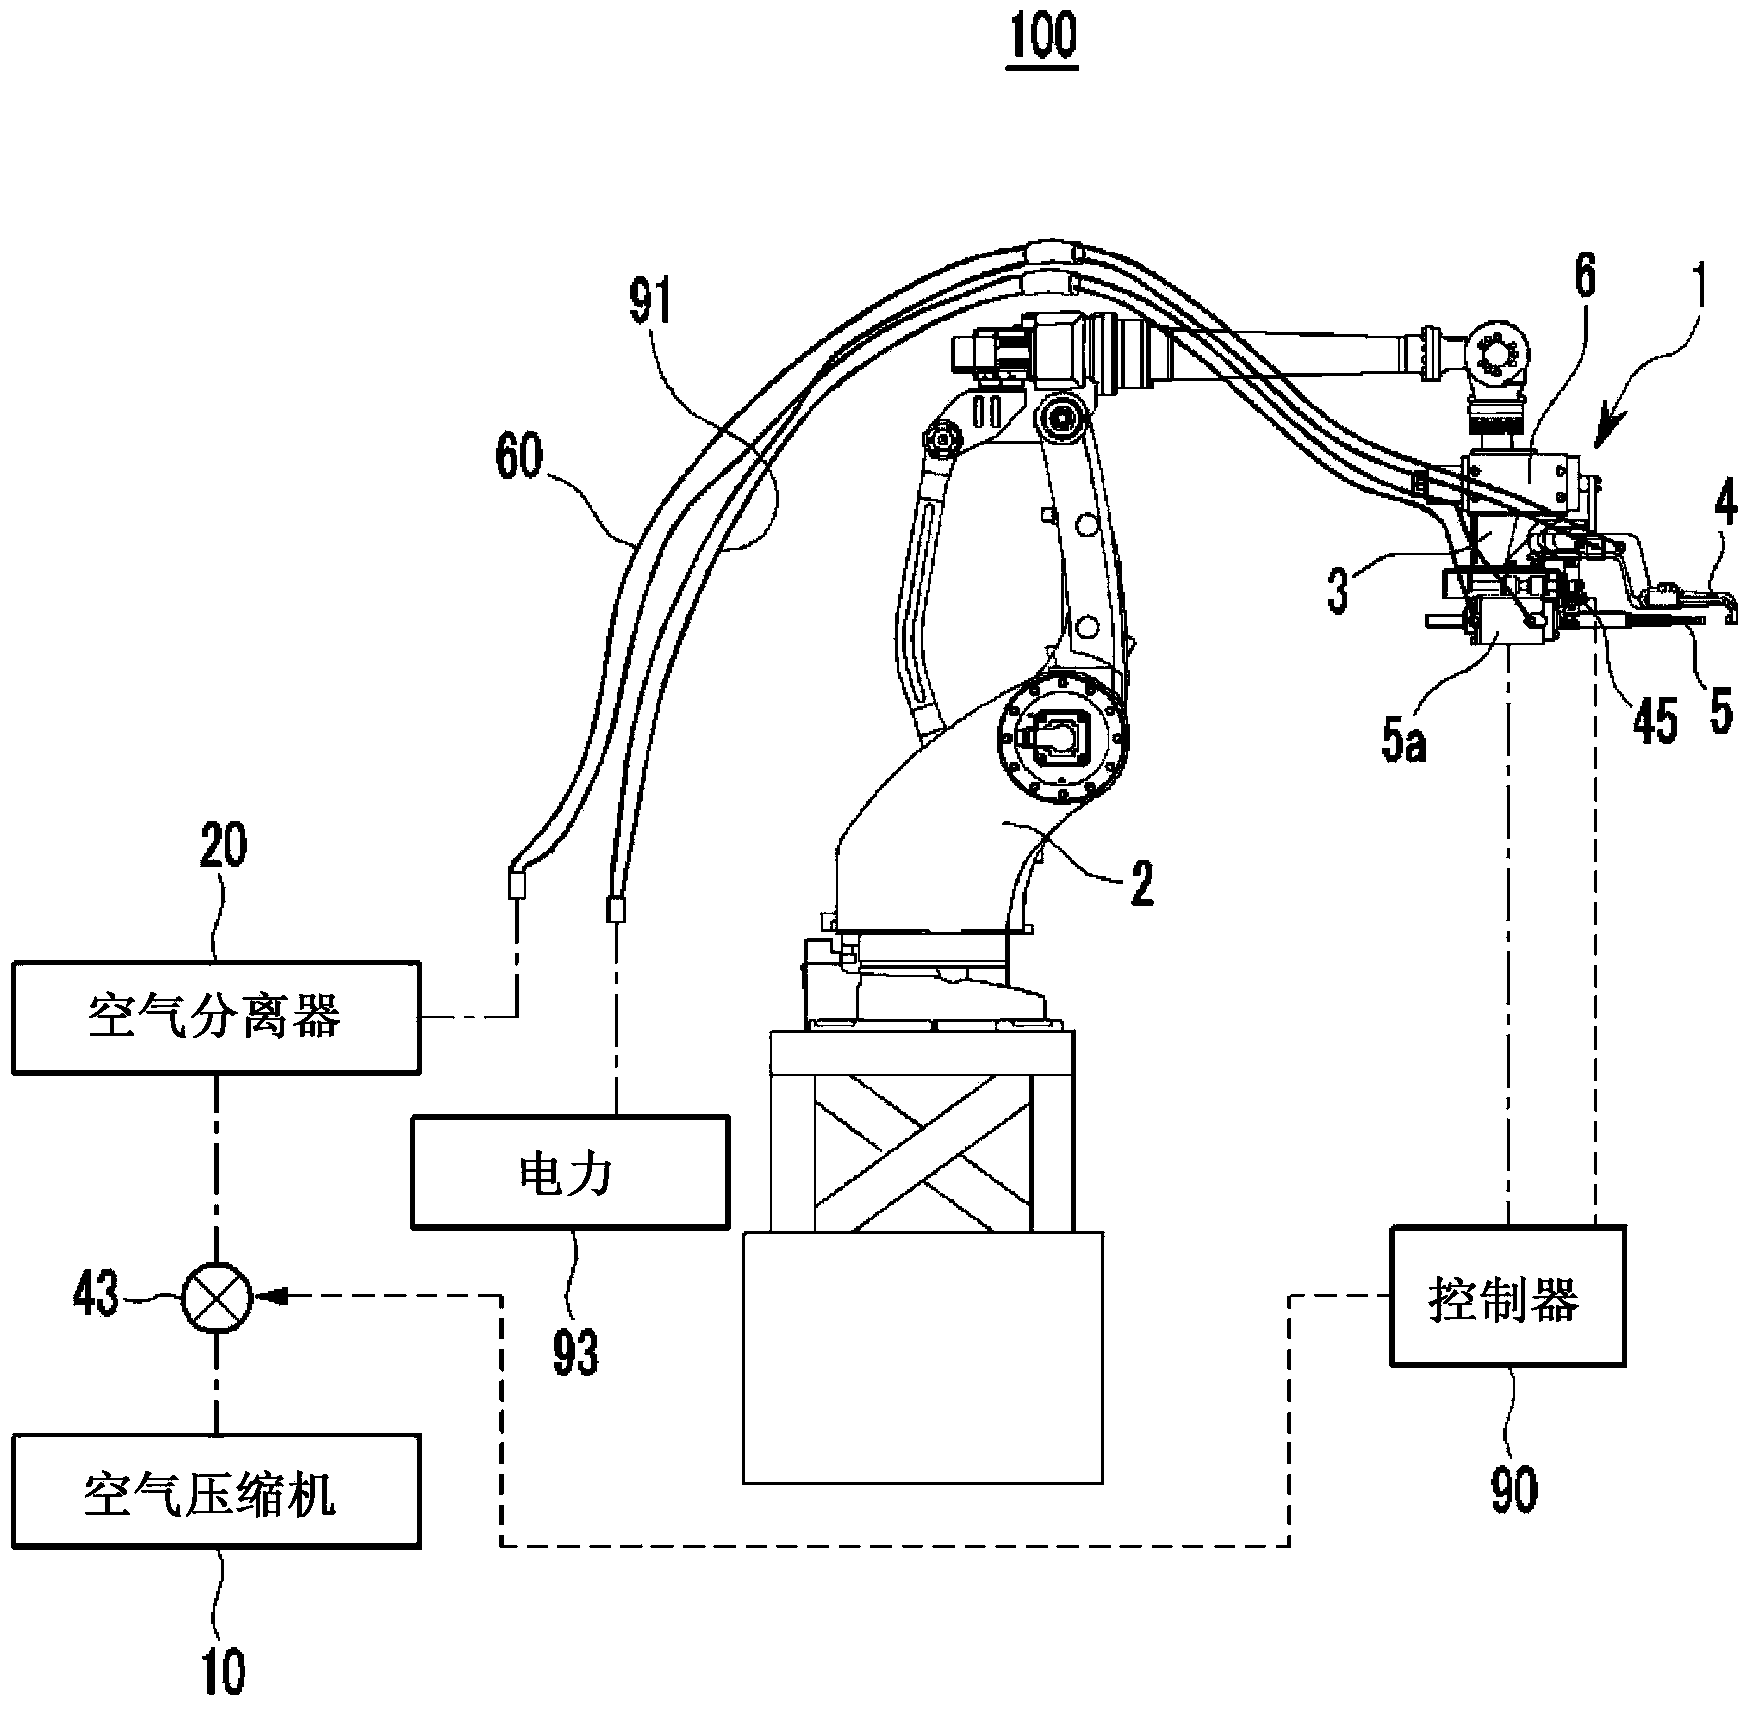 Cooling system for spot welding device